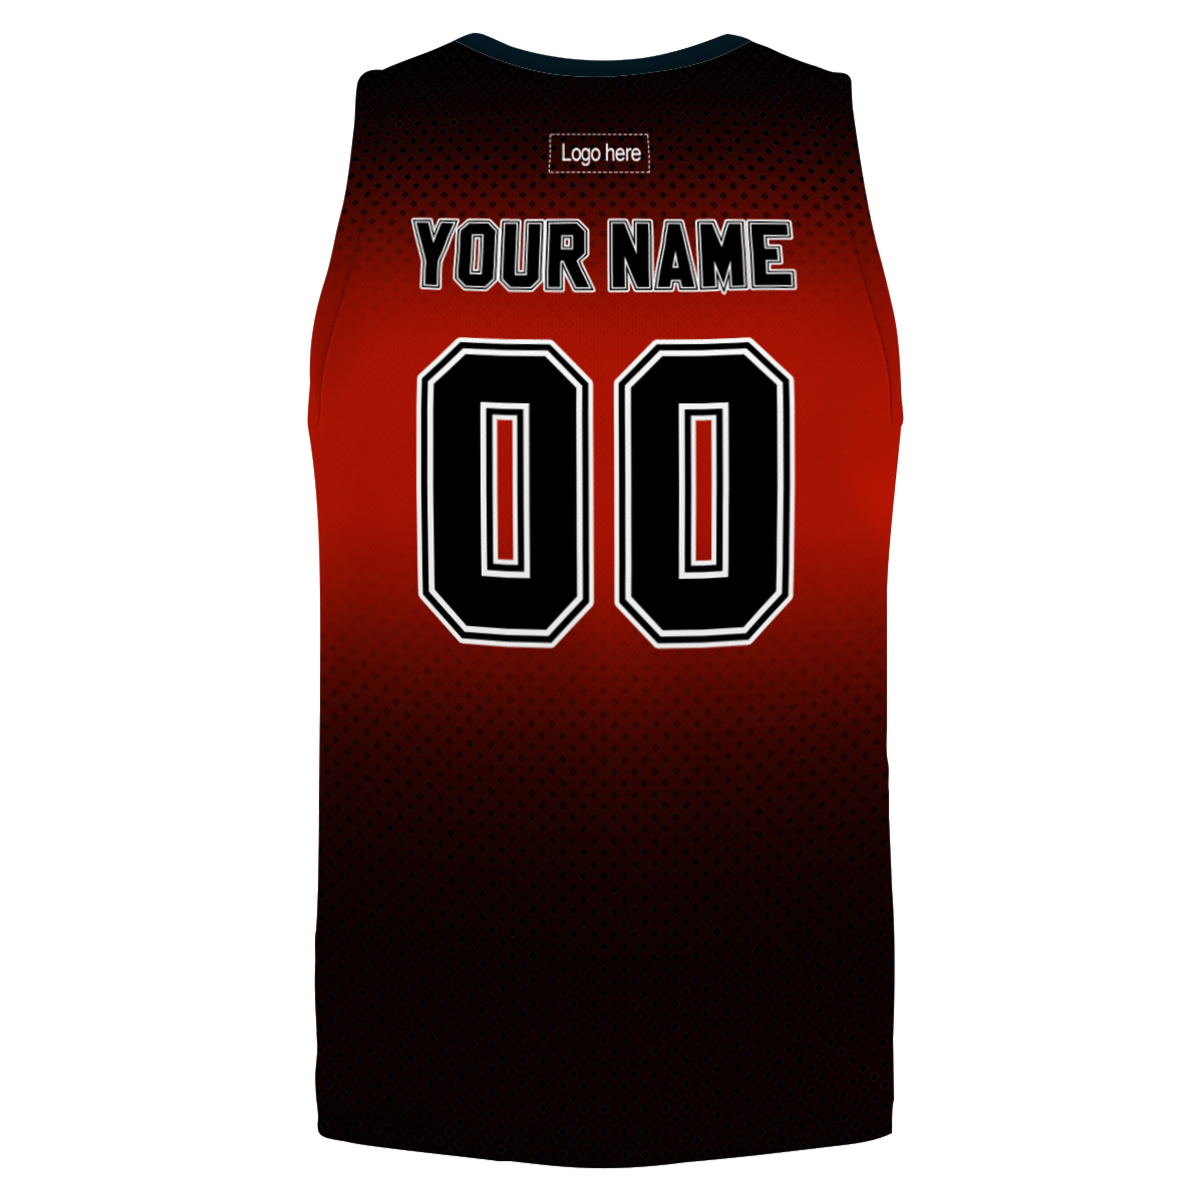 customize-basketball-team-wear-suits-print-on-demand-sublimation-breathable-basketball-jersey-uniforms-at-cj-pod-6